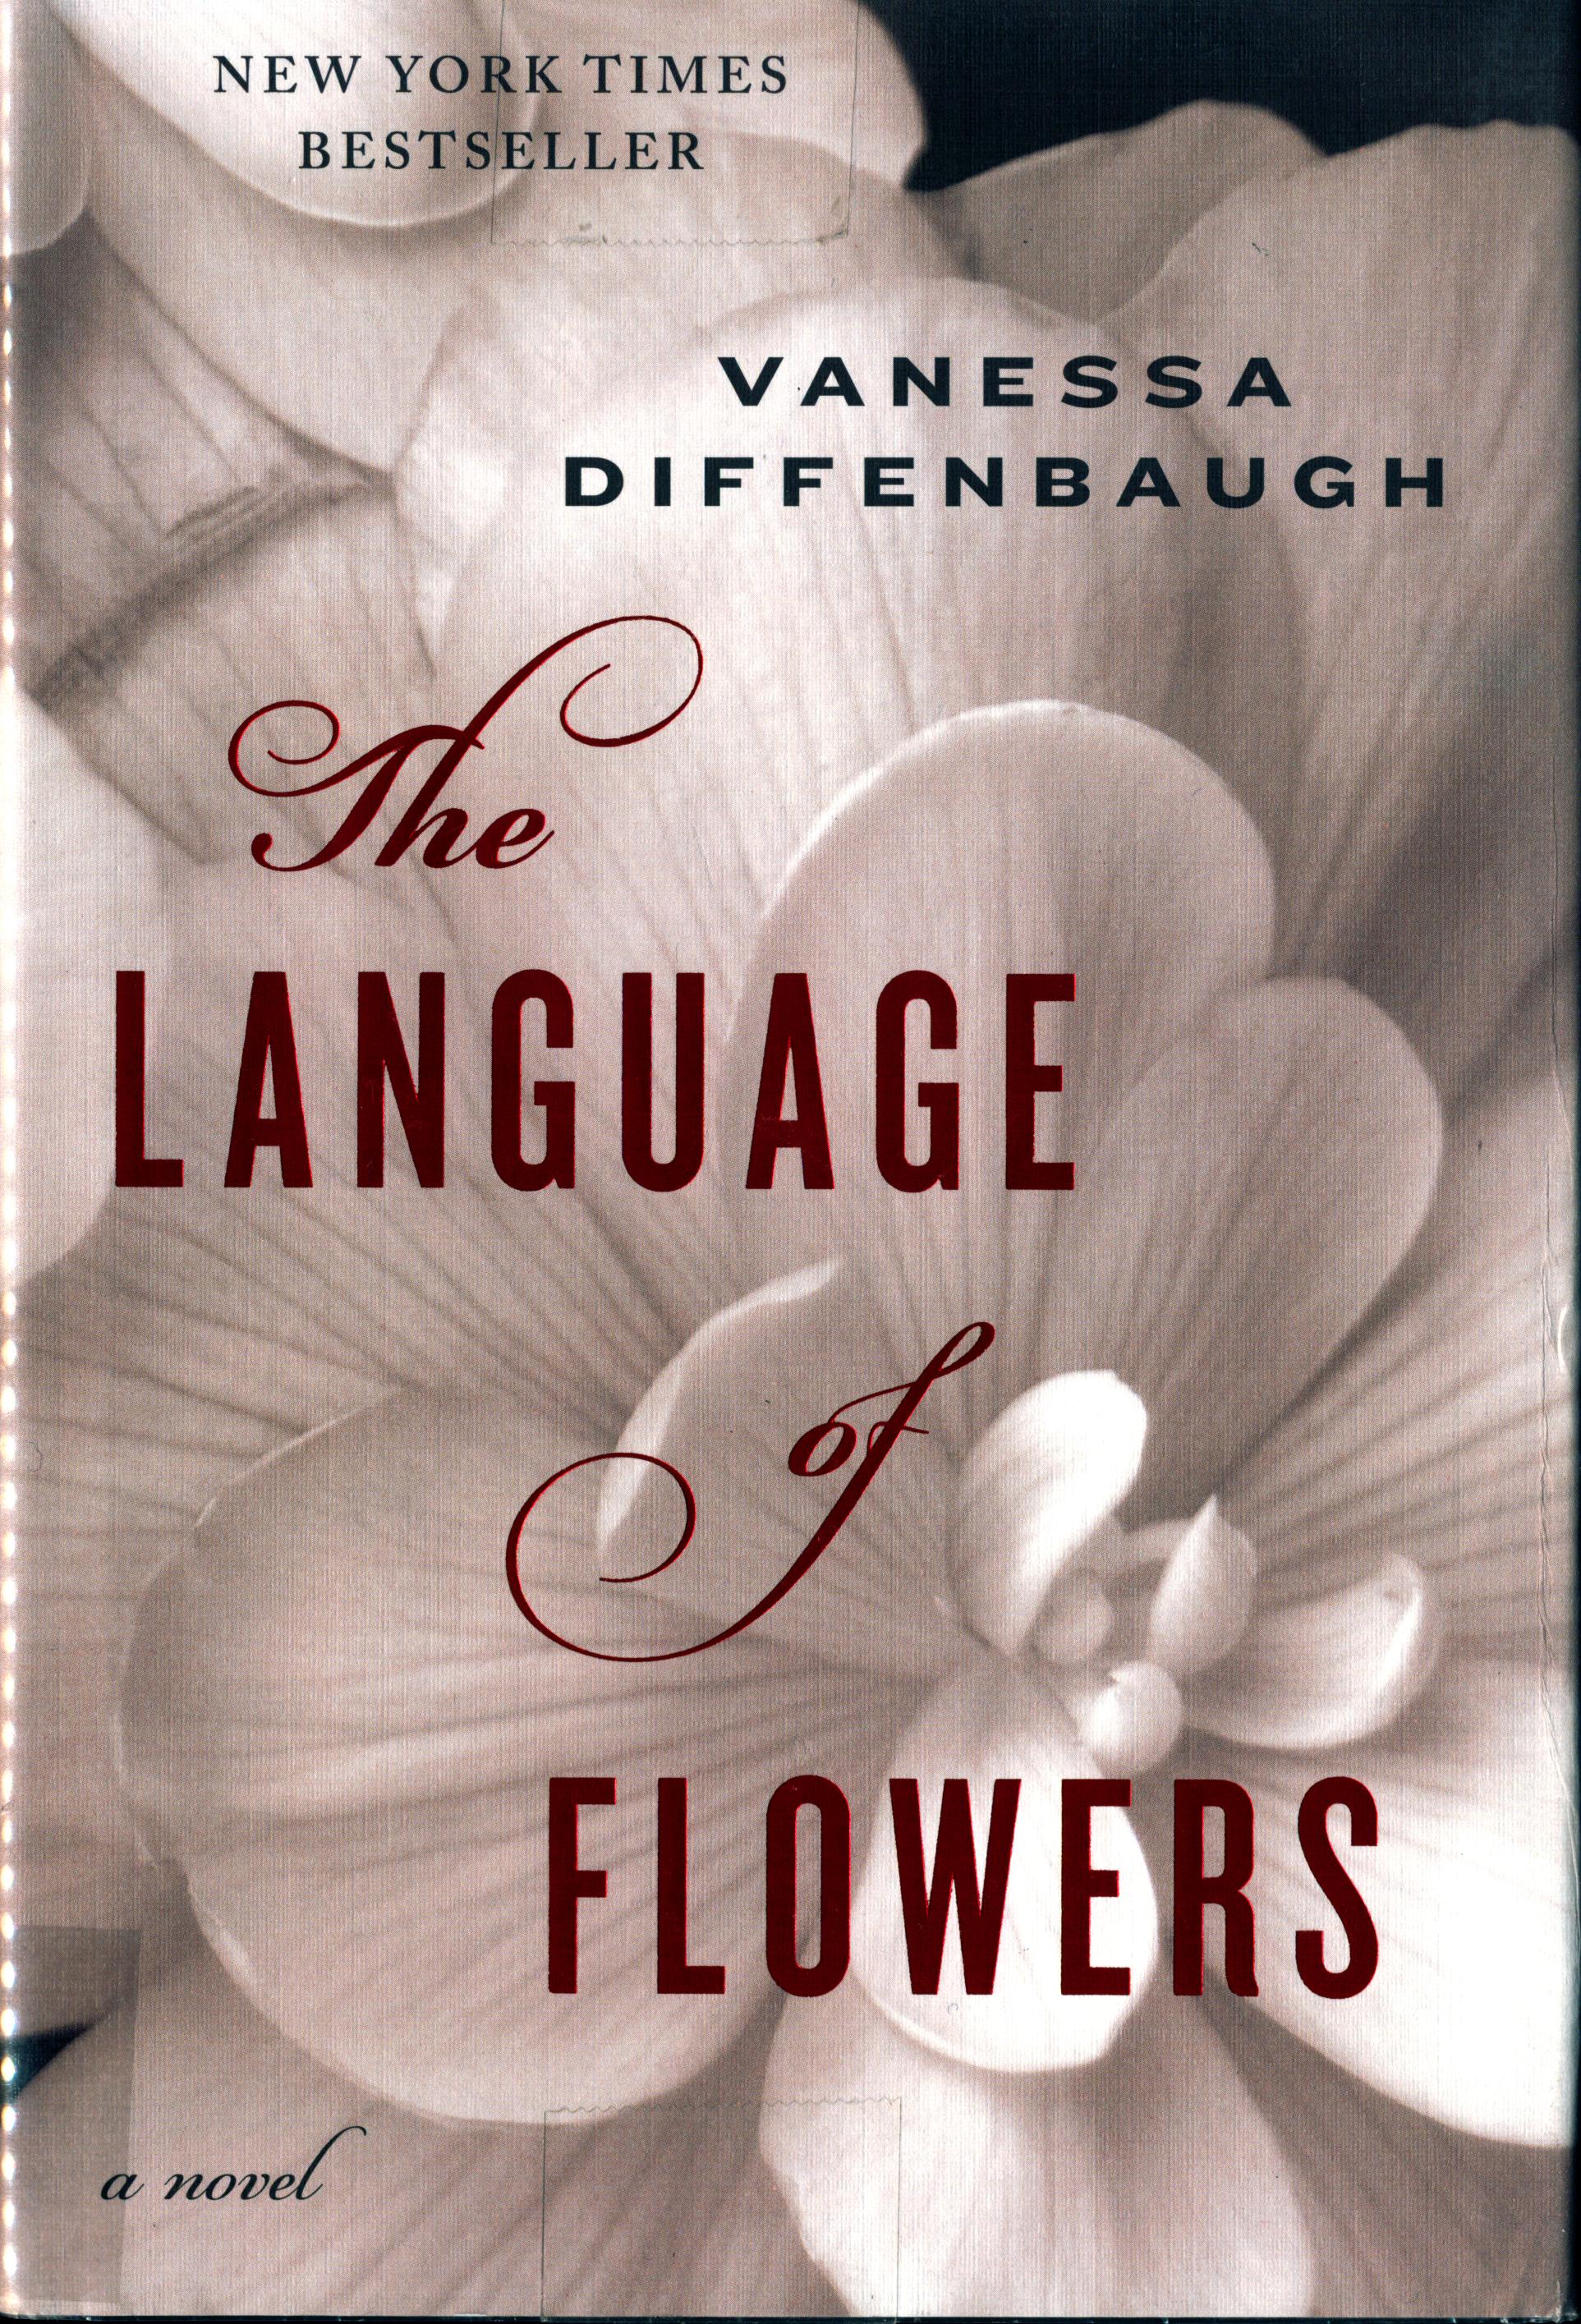 The cover of Vanessa Diffenbaugh's novel The Language of Flowers